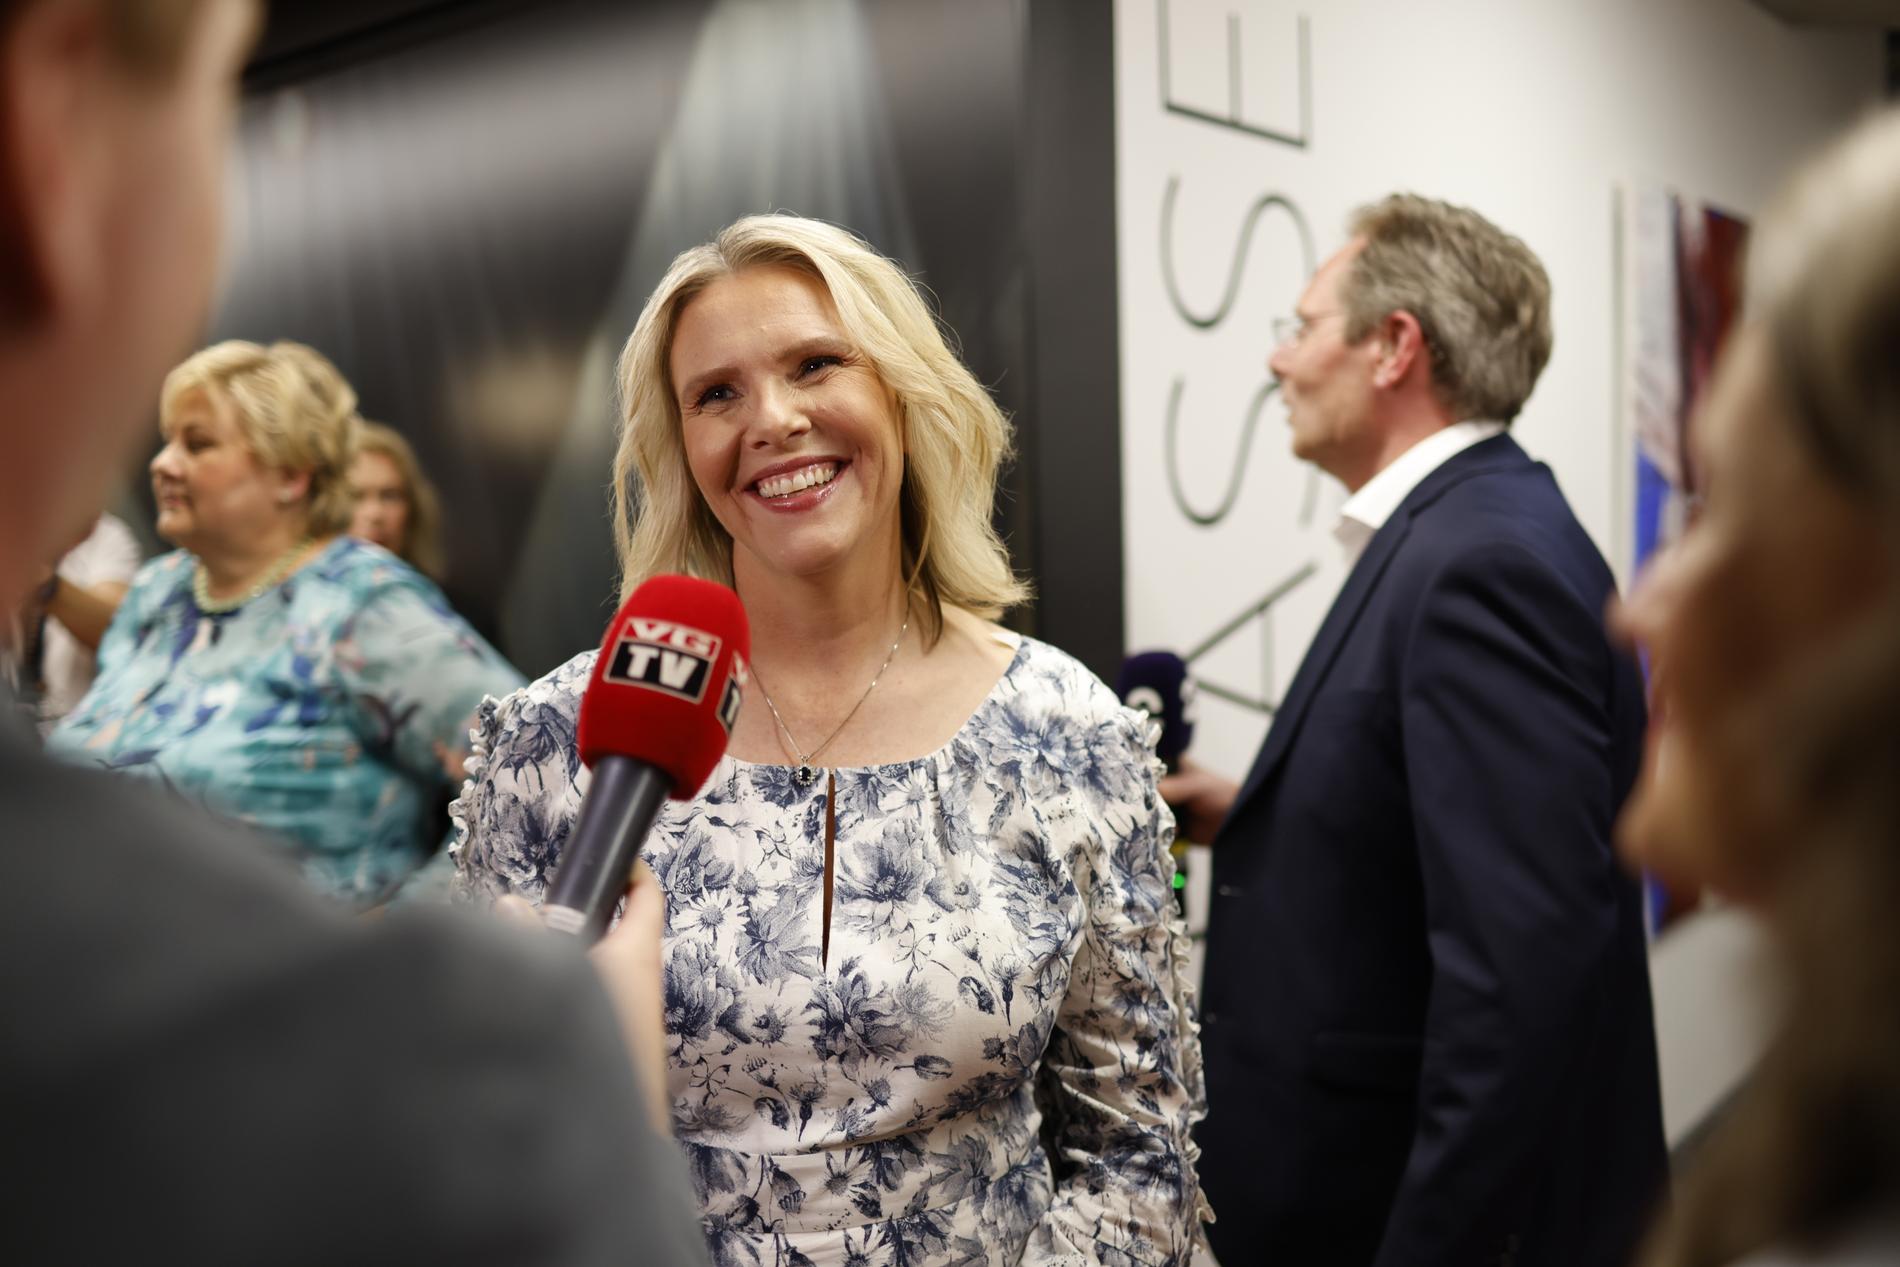 Listhaug and Solberg clash over MDG cooperation: – Just talk